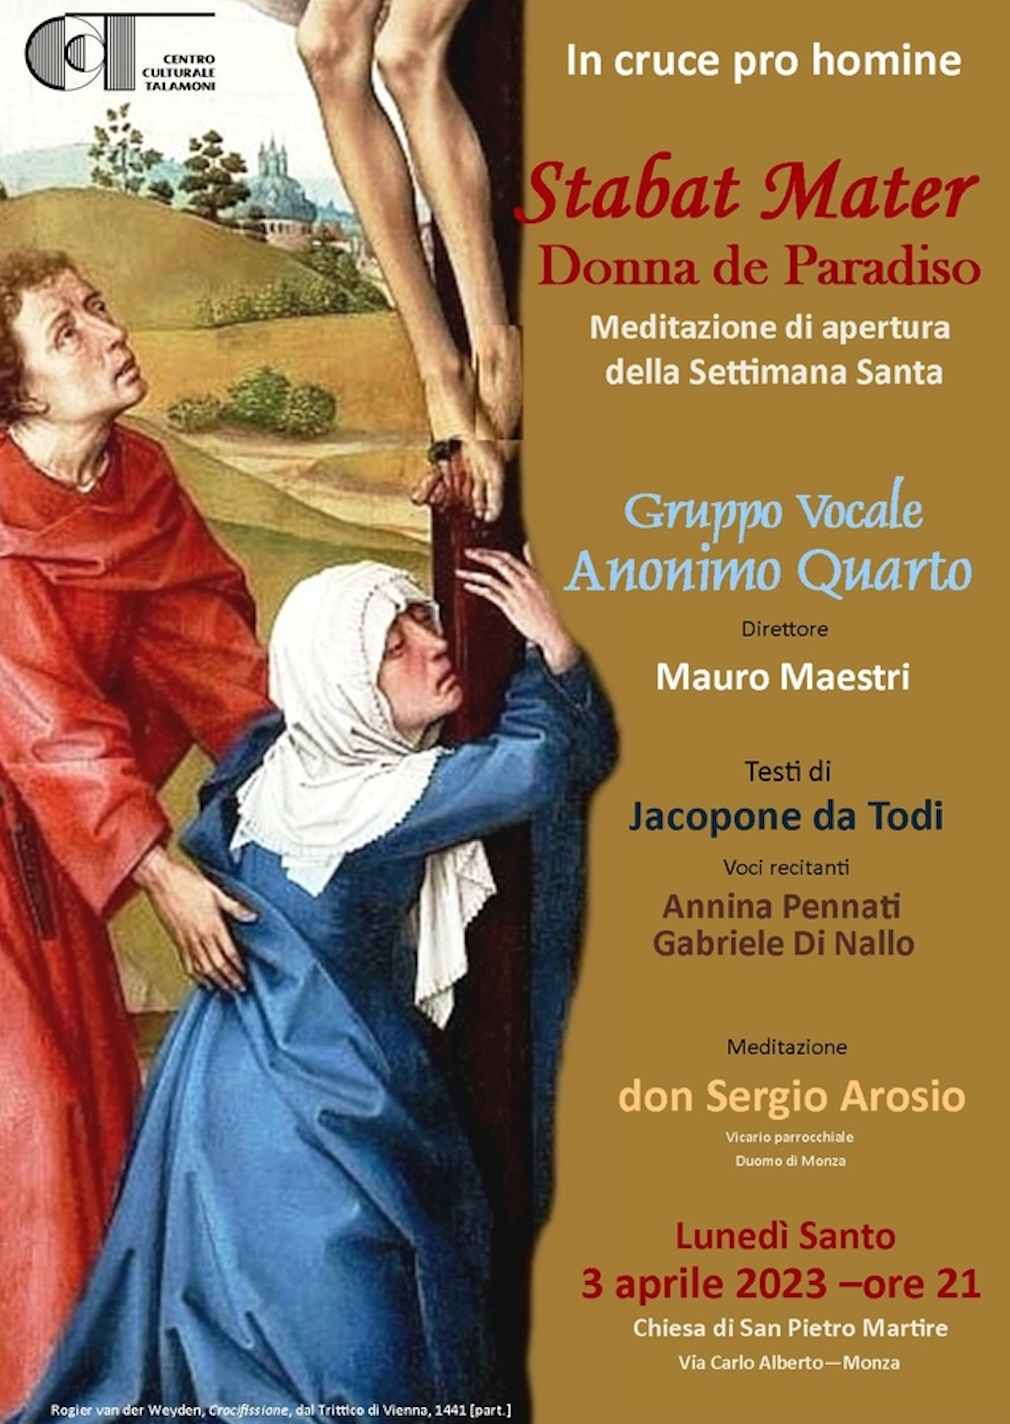 Featured image for “Monza: Stabat Mater, Donna de Paradiso”